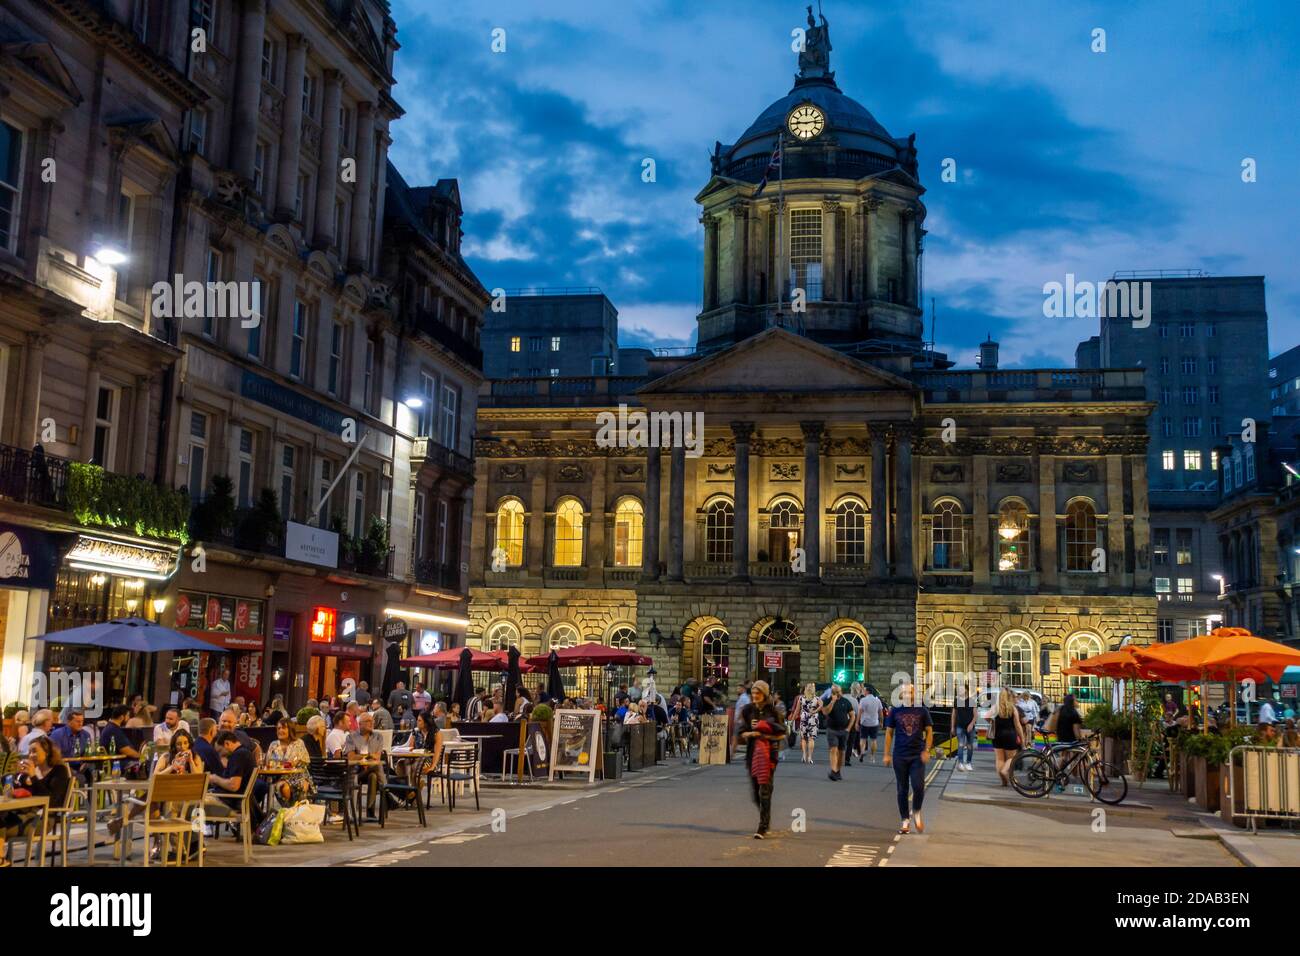 Night view of outdoor cafes and bars on Castle Street with Liverpool Town Hall in background, Liverpool, England, UK Stock Photo